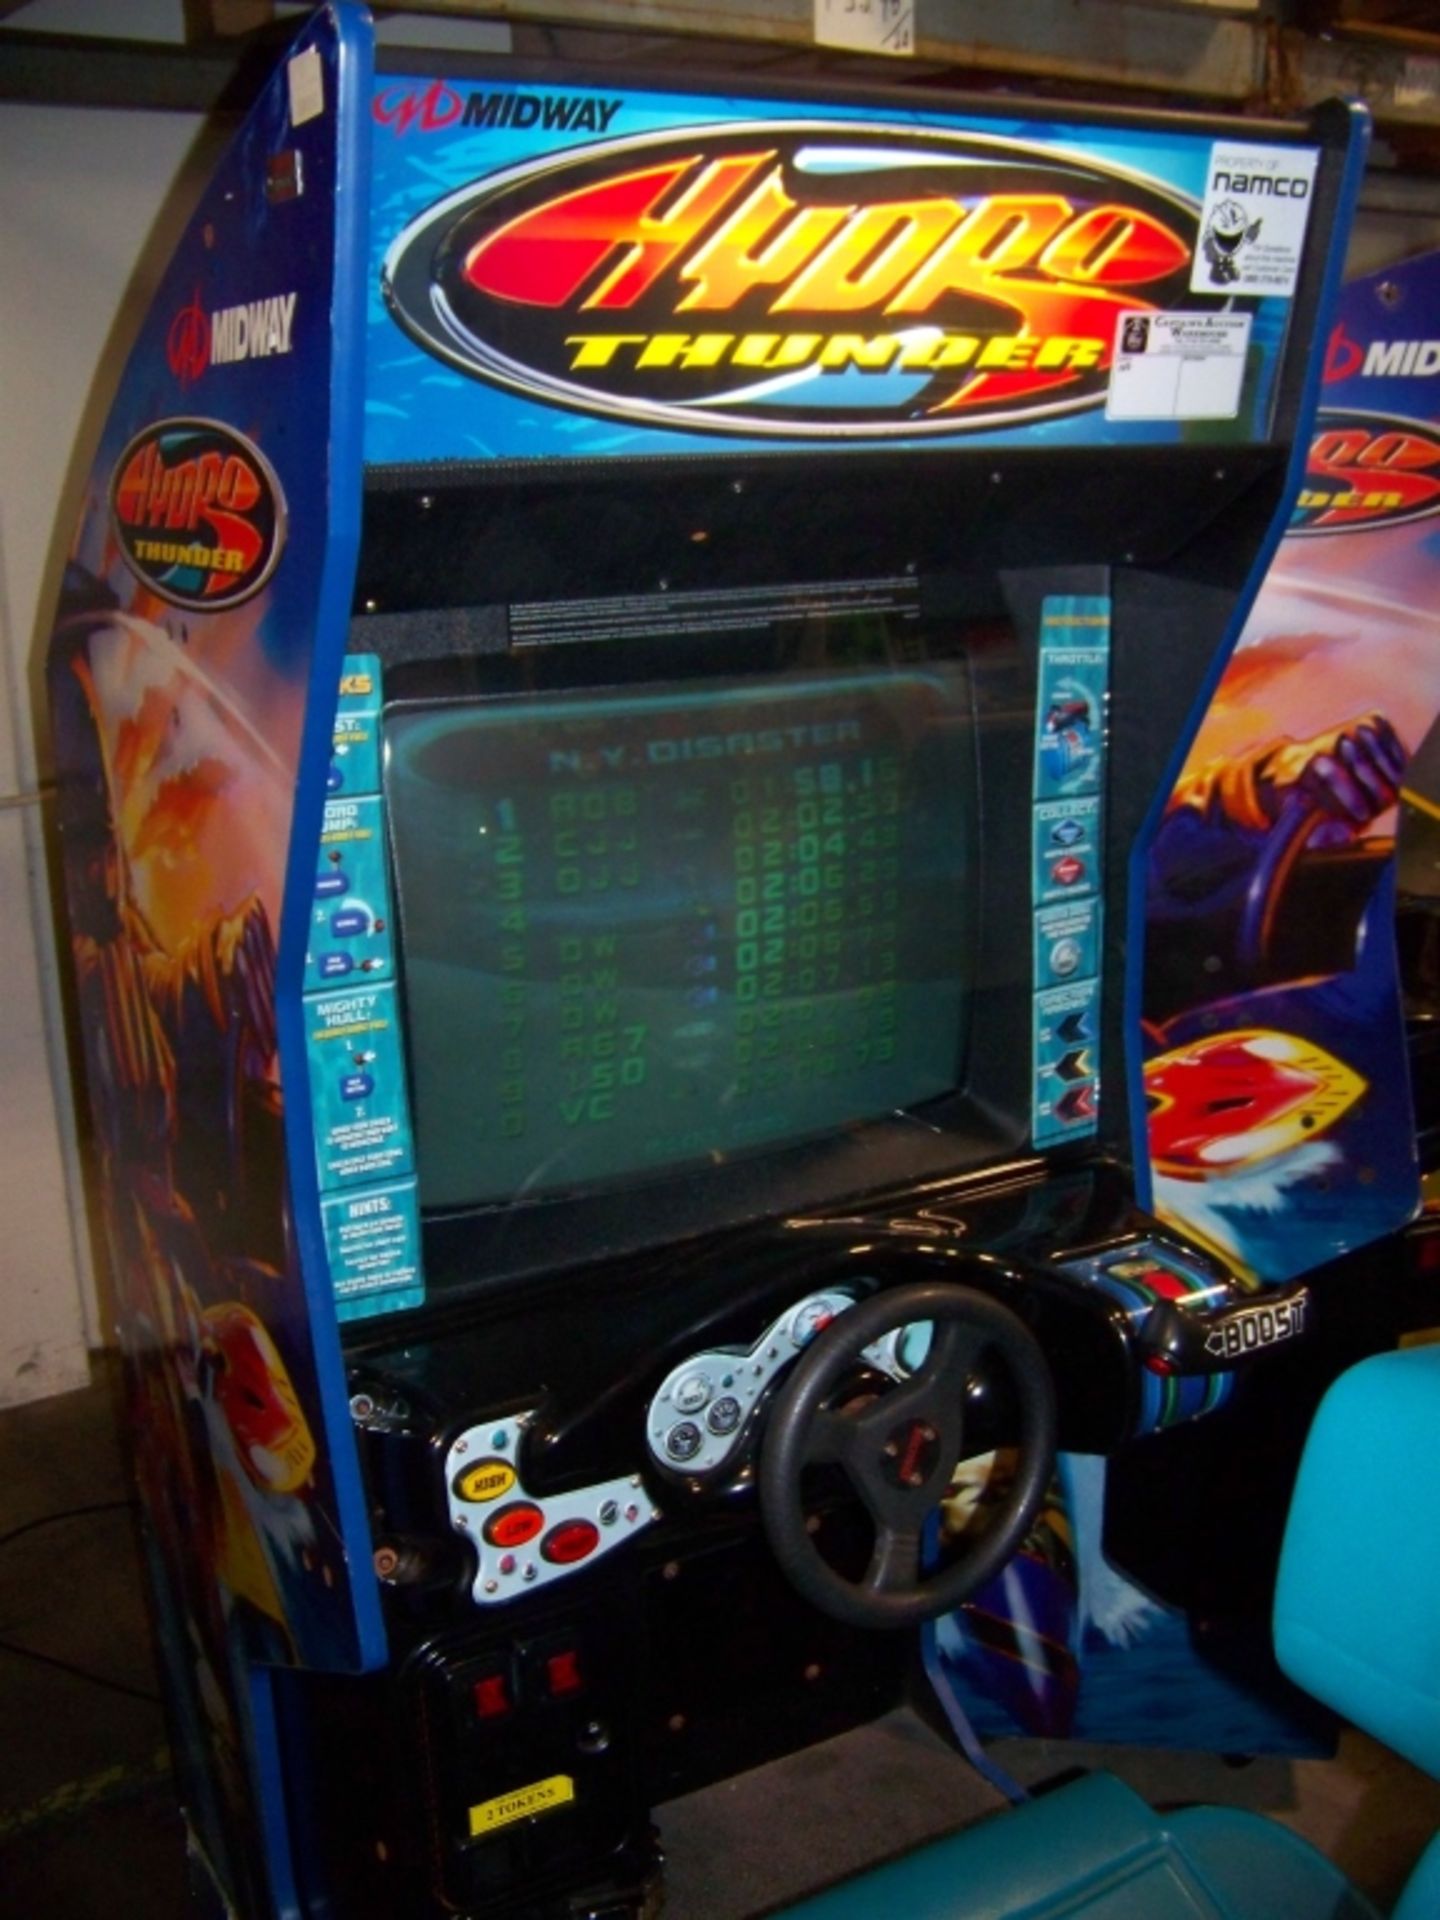 HYDRO THUNDER BOAT RACING ARCADE GAME MIDWAY